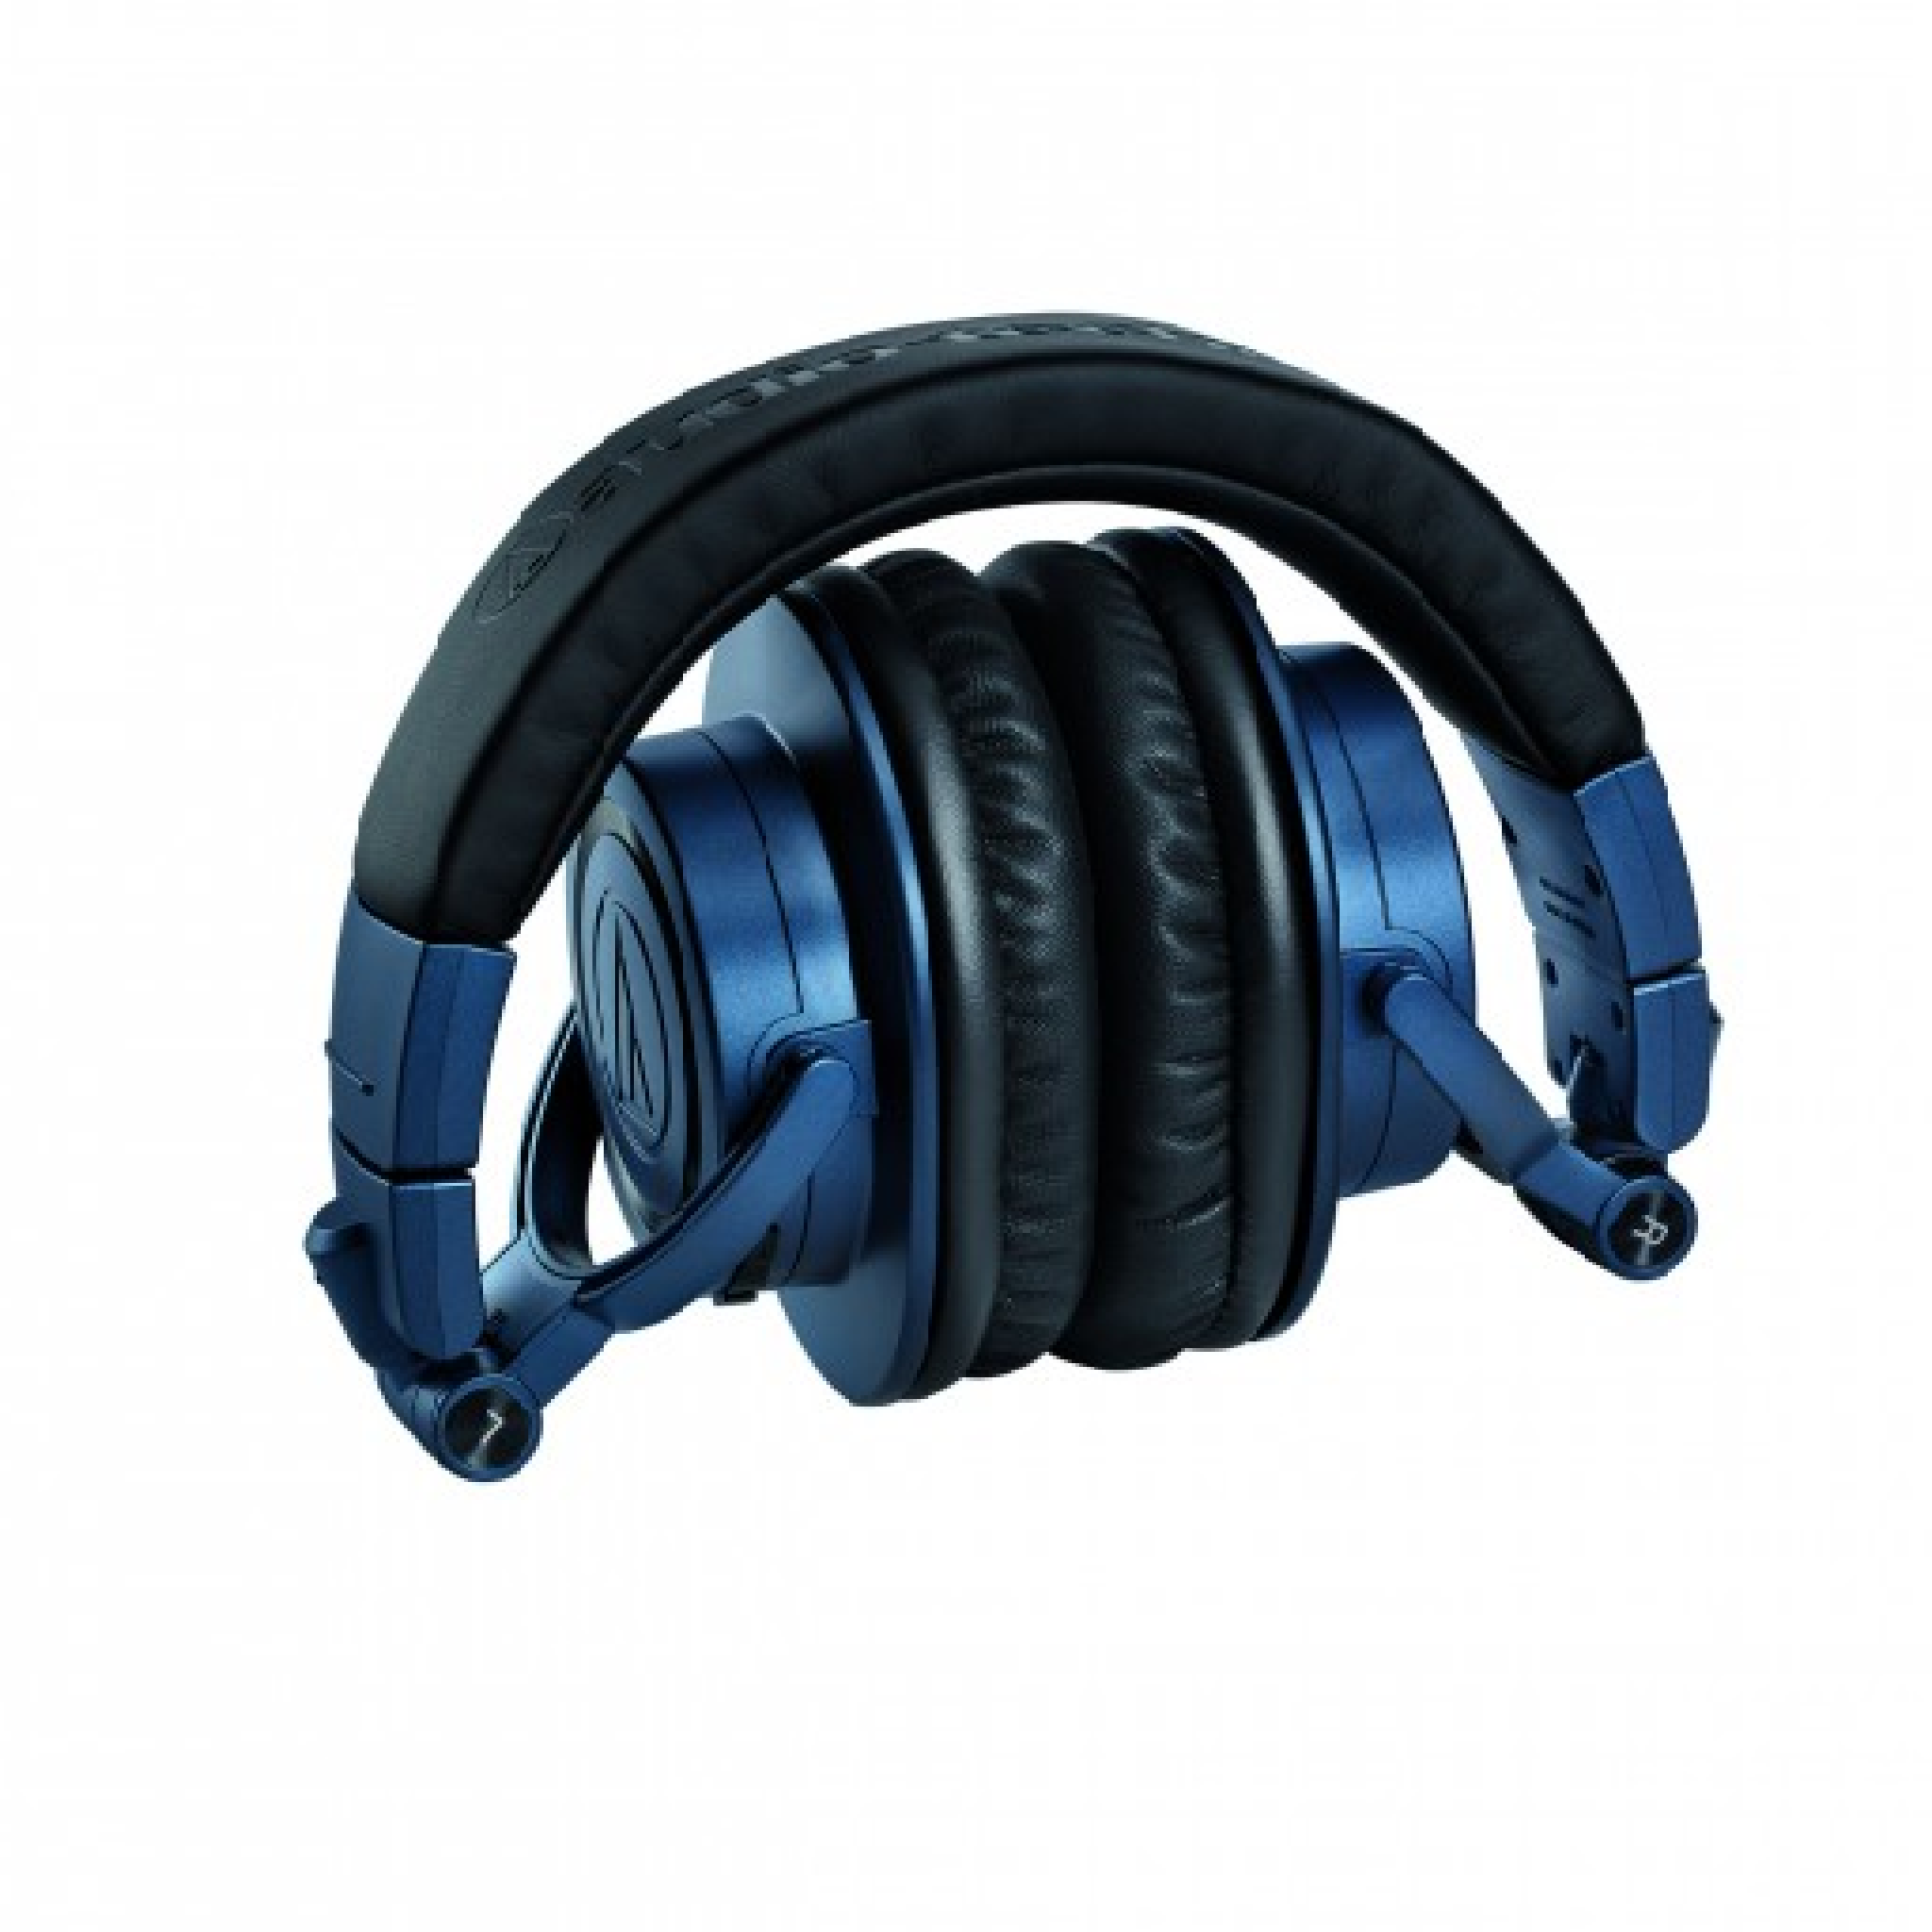 Audio-Technica ATH-M50XBT2 DS Wireless Over-Ear Headphones (Deep Sea Limited Edition)